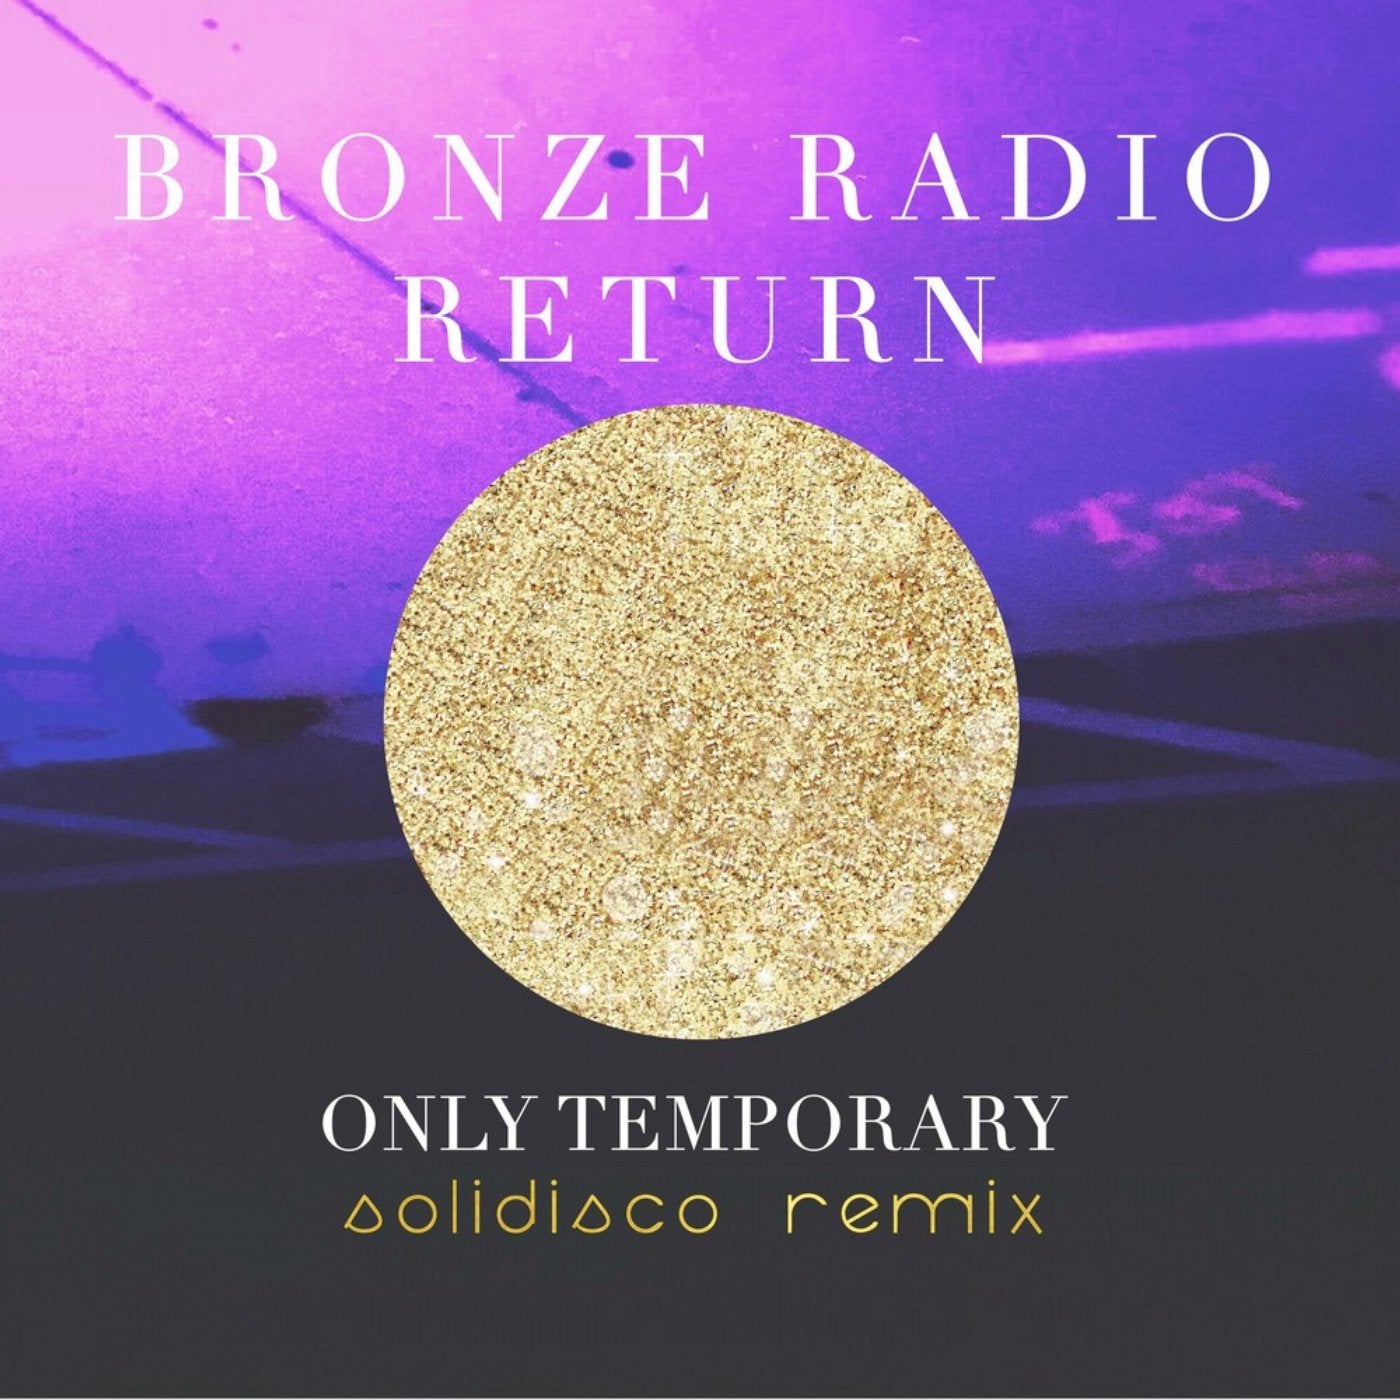 Only Temporary  (Solidisco Remix)